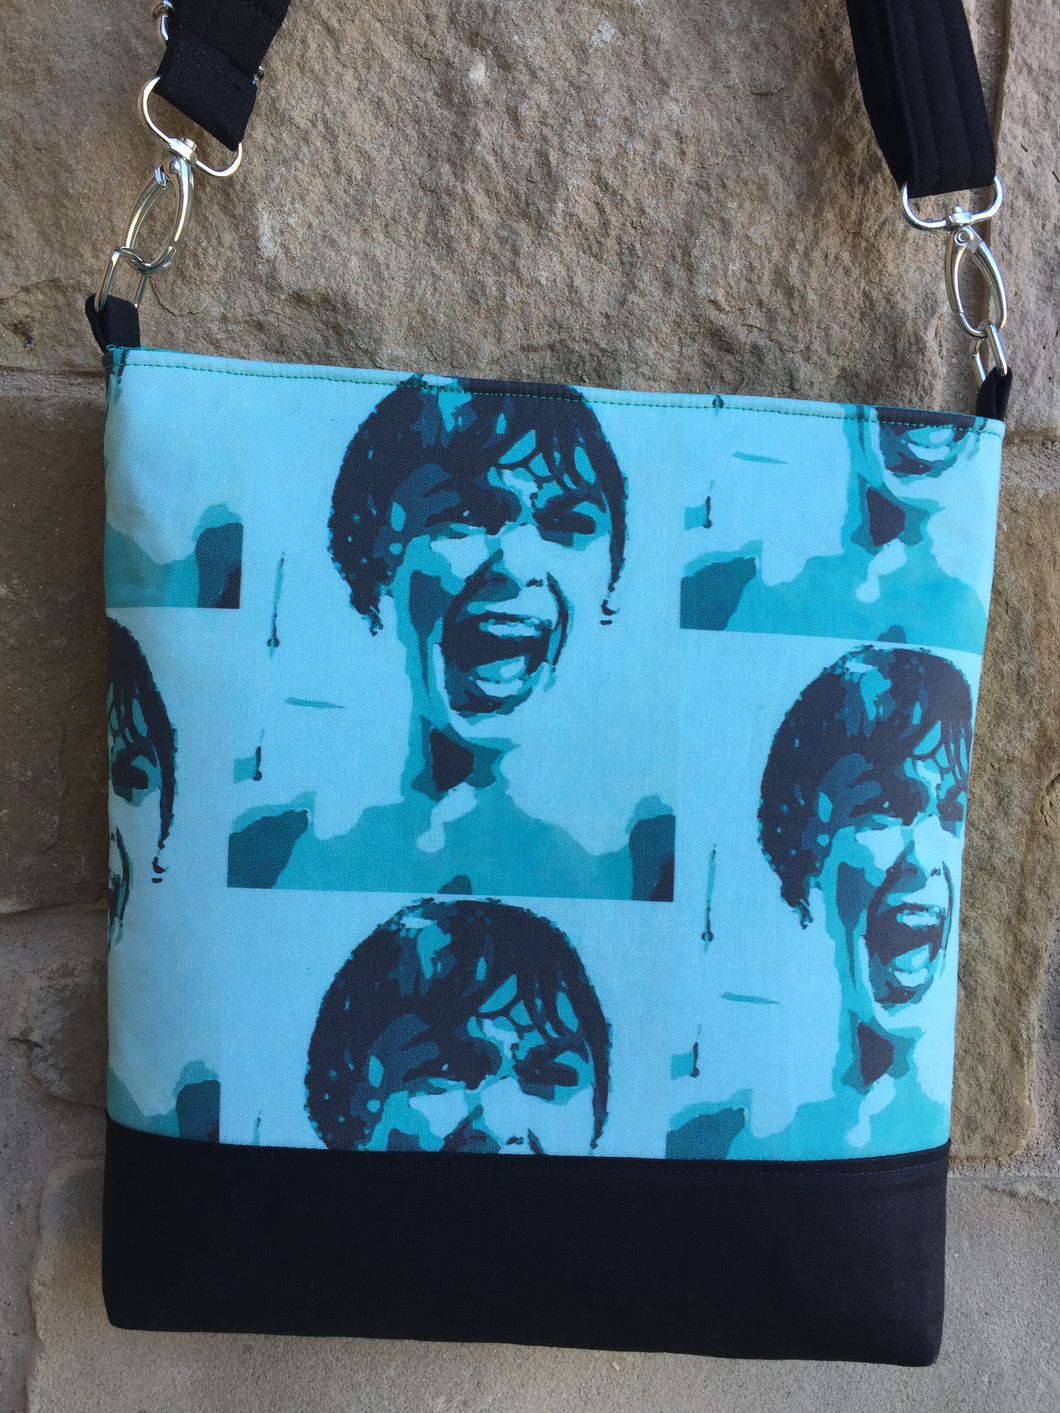 Messenger Bag Made With Screaming Shower Lady Inspired Fabric - Adjustable Strap - Zippered Closure - Zippered Pocket - Cross Body Bag